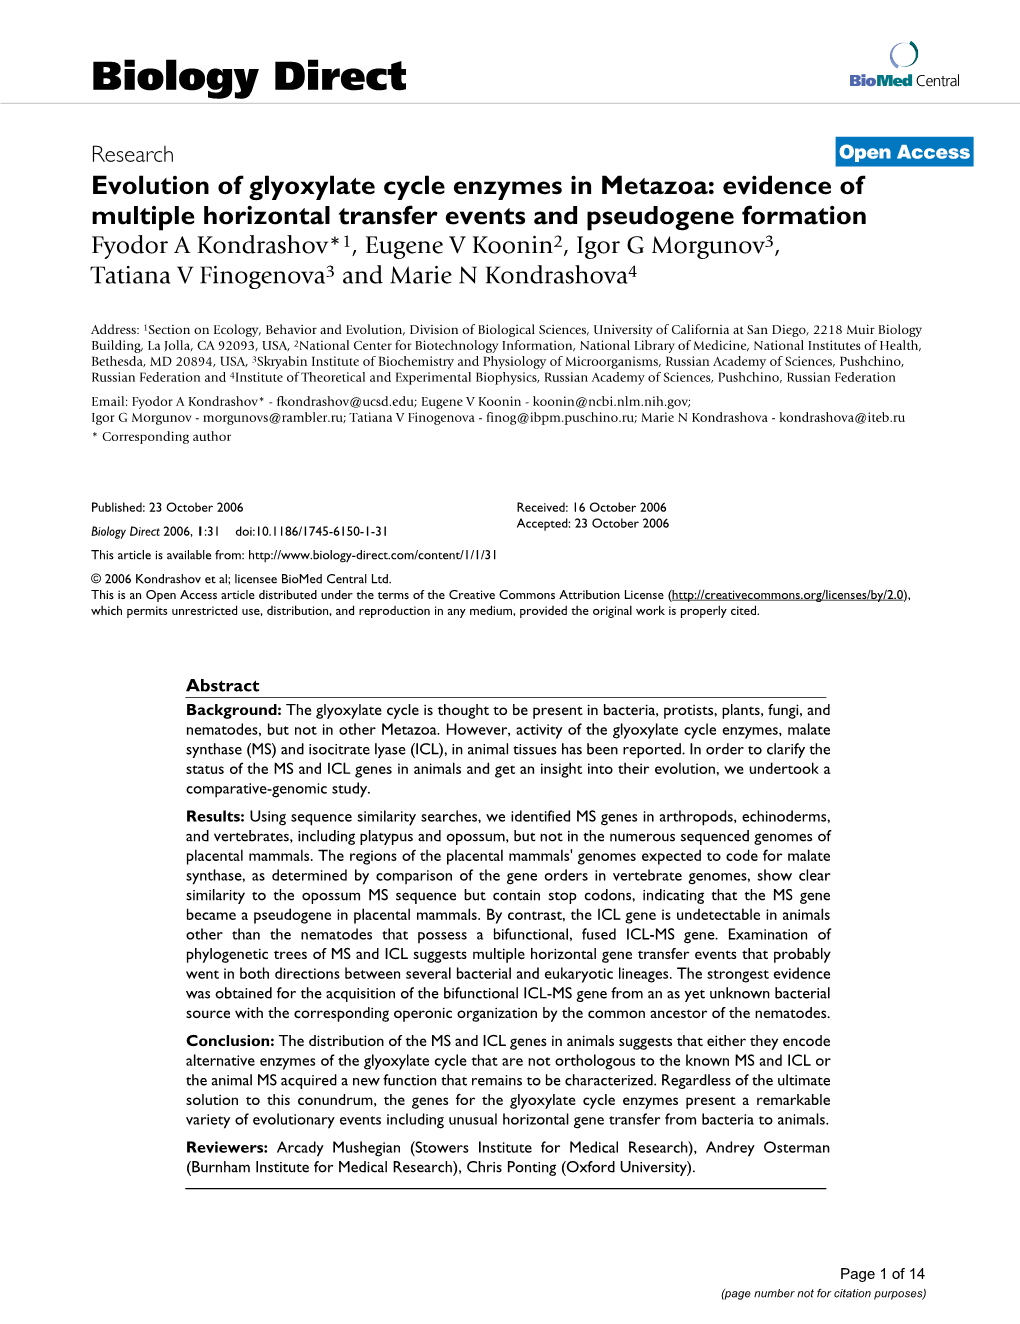 Evolution of Glyoxylate Cycle Enzymes in Metazoa: Evidence of Multiple Horizontal Transfer Events and Pseudogene Formation